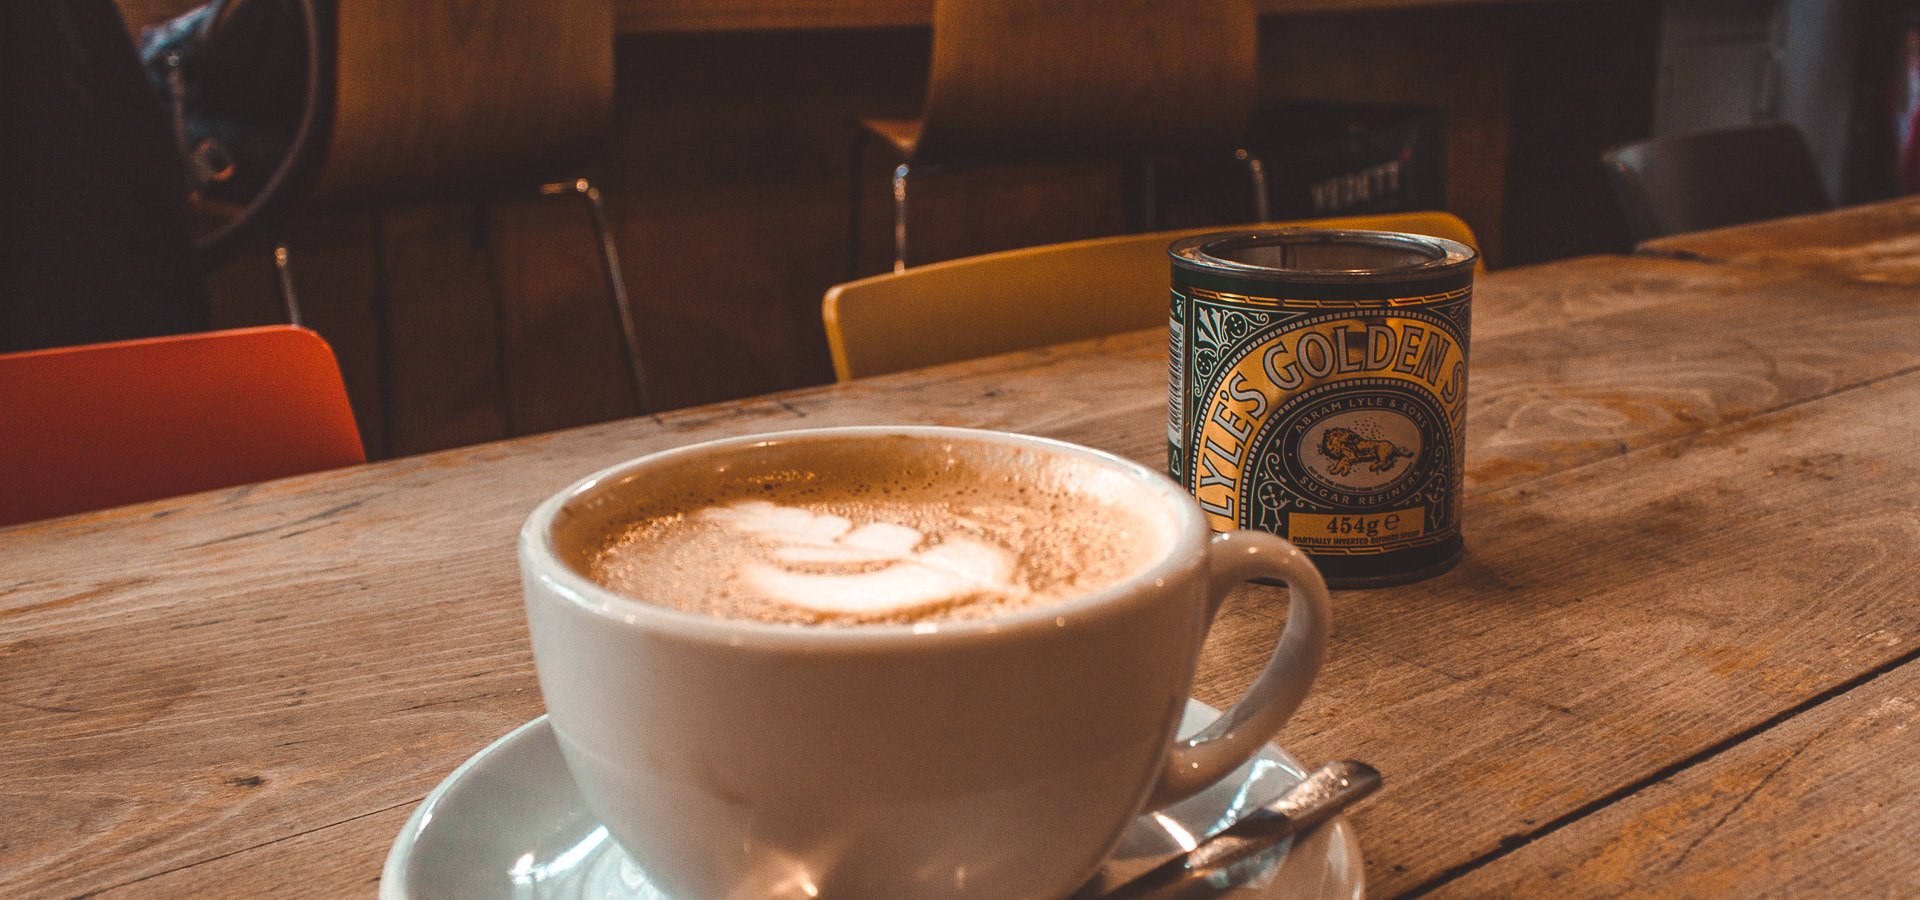 The Top 10 Cafes For Specialty Coffee In London | London Markets You Need To Visit 2